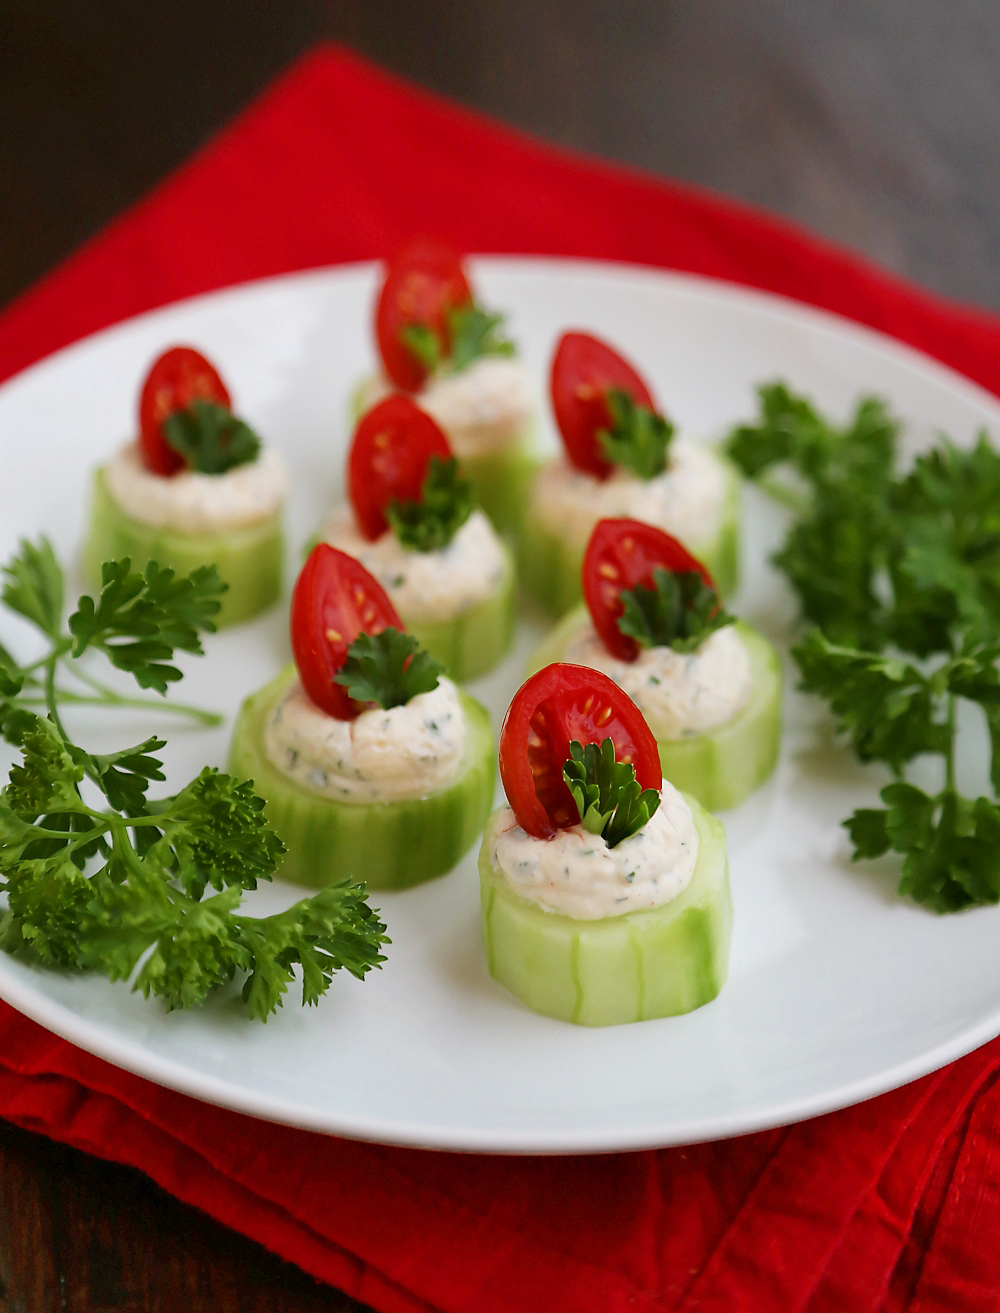 Cucumber Tomato Bites with Creamy Parmesan Herb Spread - Fresh, easy bites with a heavenly homemade herb spread are perfect for holiday and summer parties! Thecomfortofcooking.com